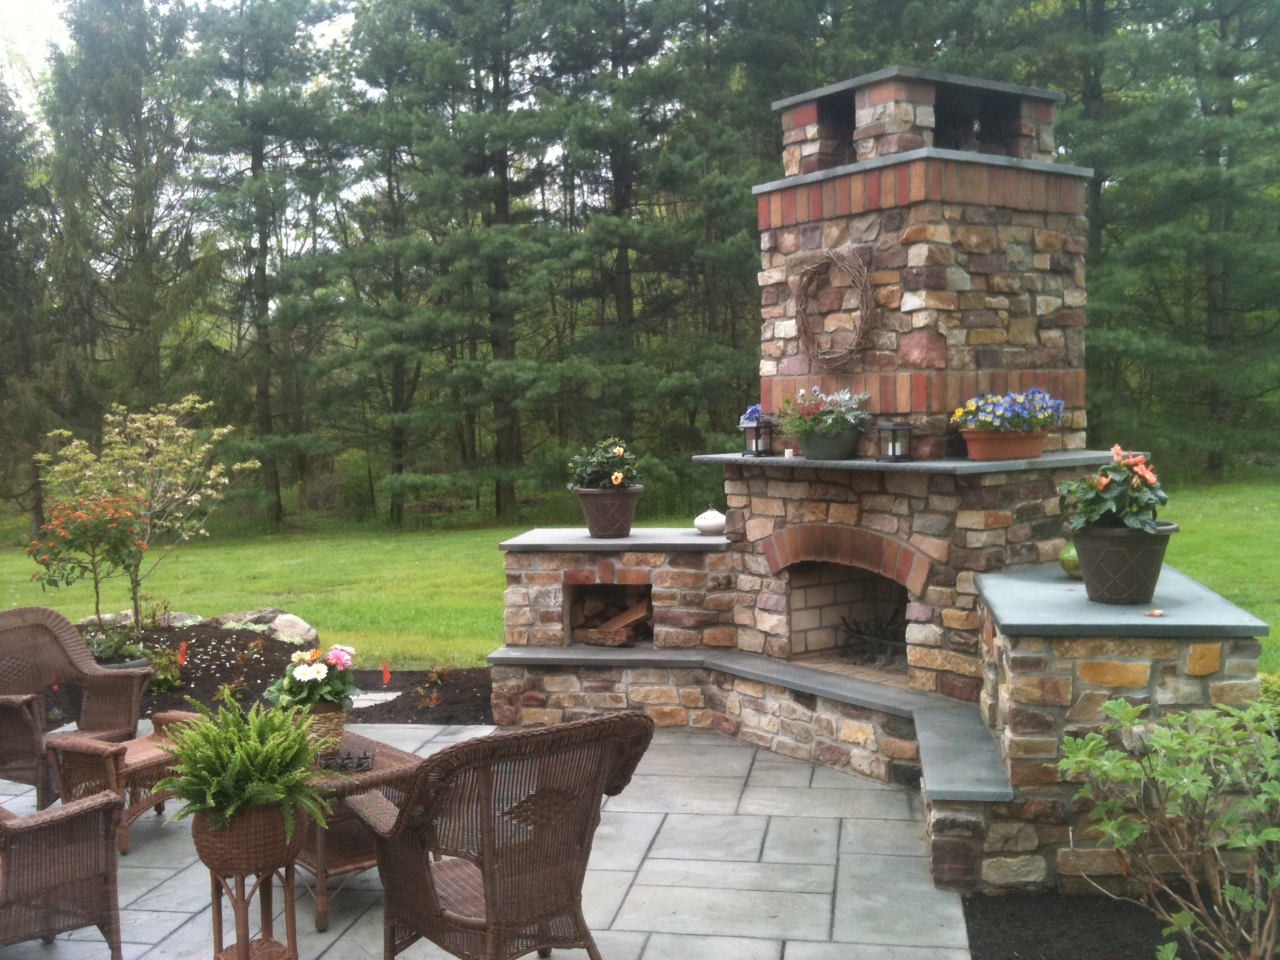 Outdoor Fireplace Doylestown Pa, How Much Does It Cost To Build A Covered Patio With Fireplace